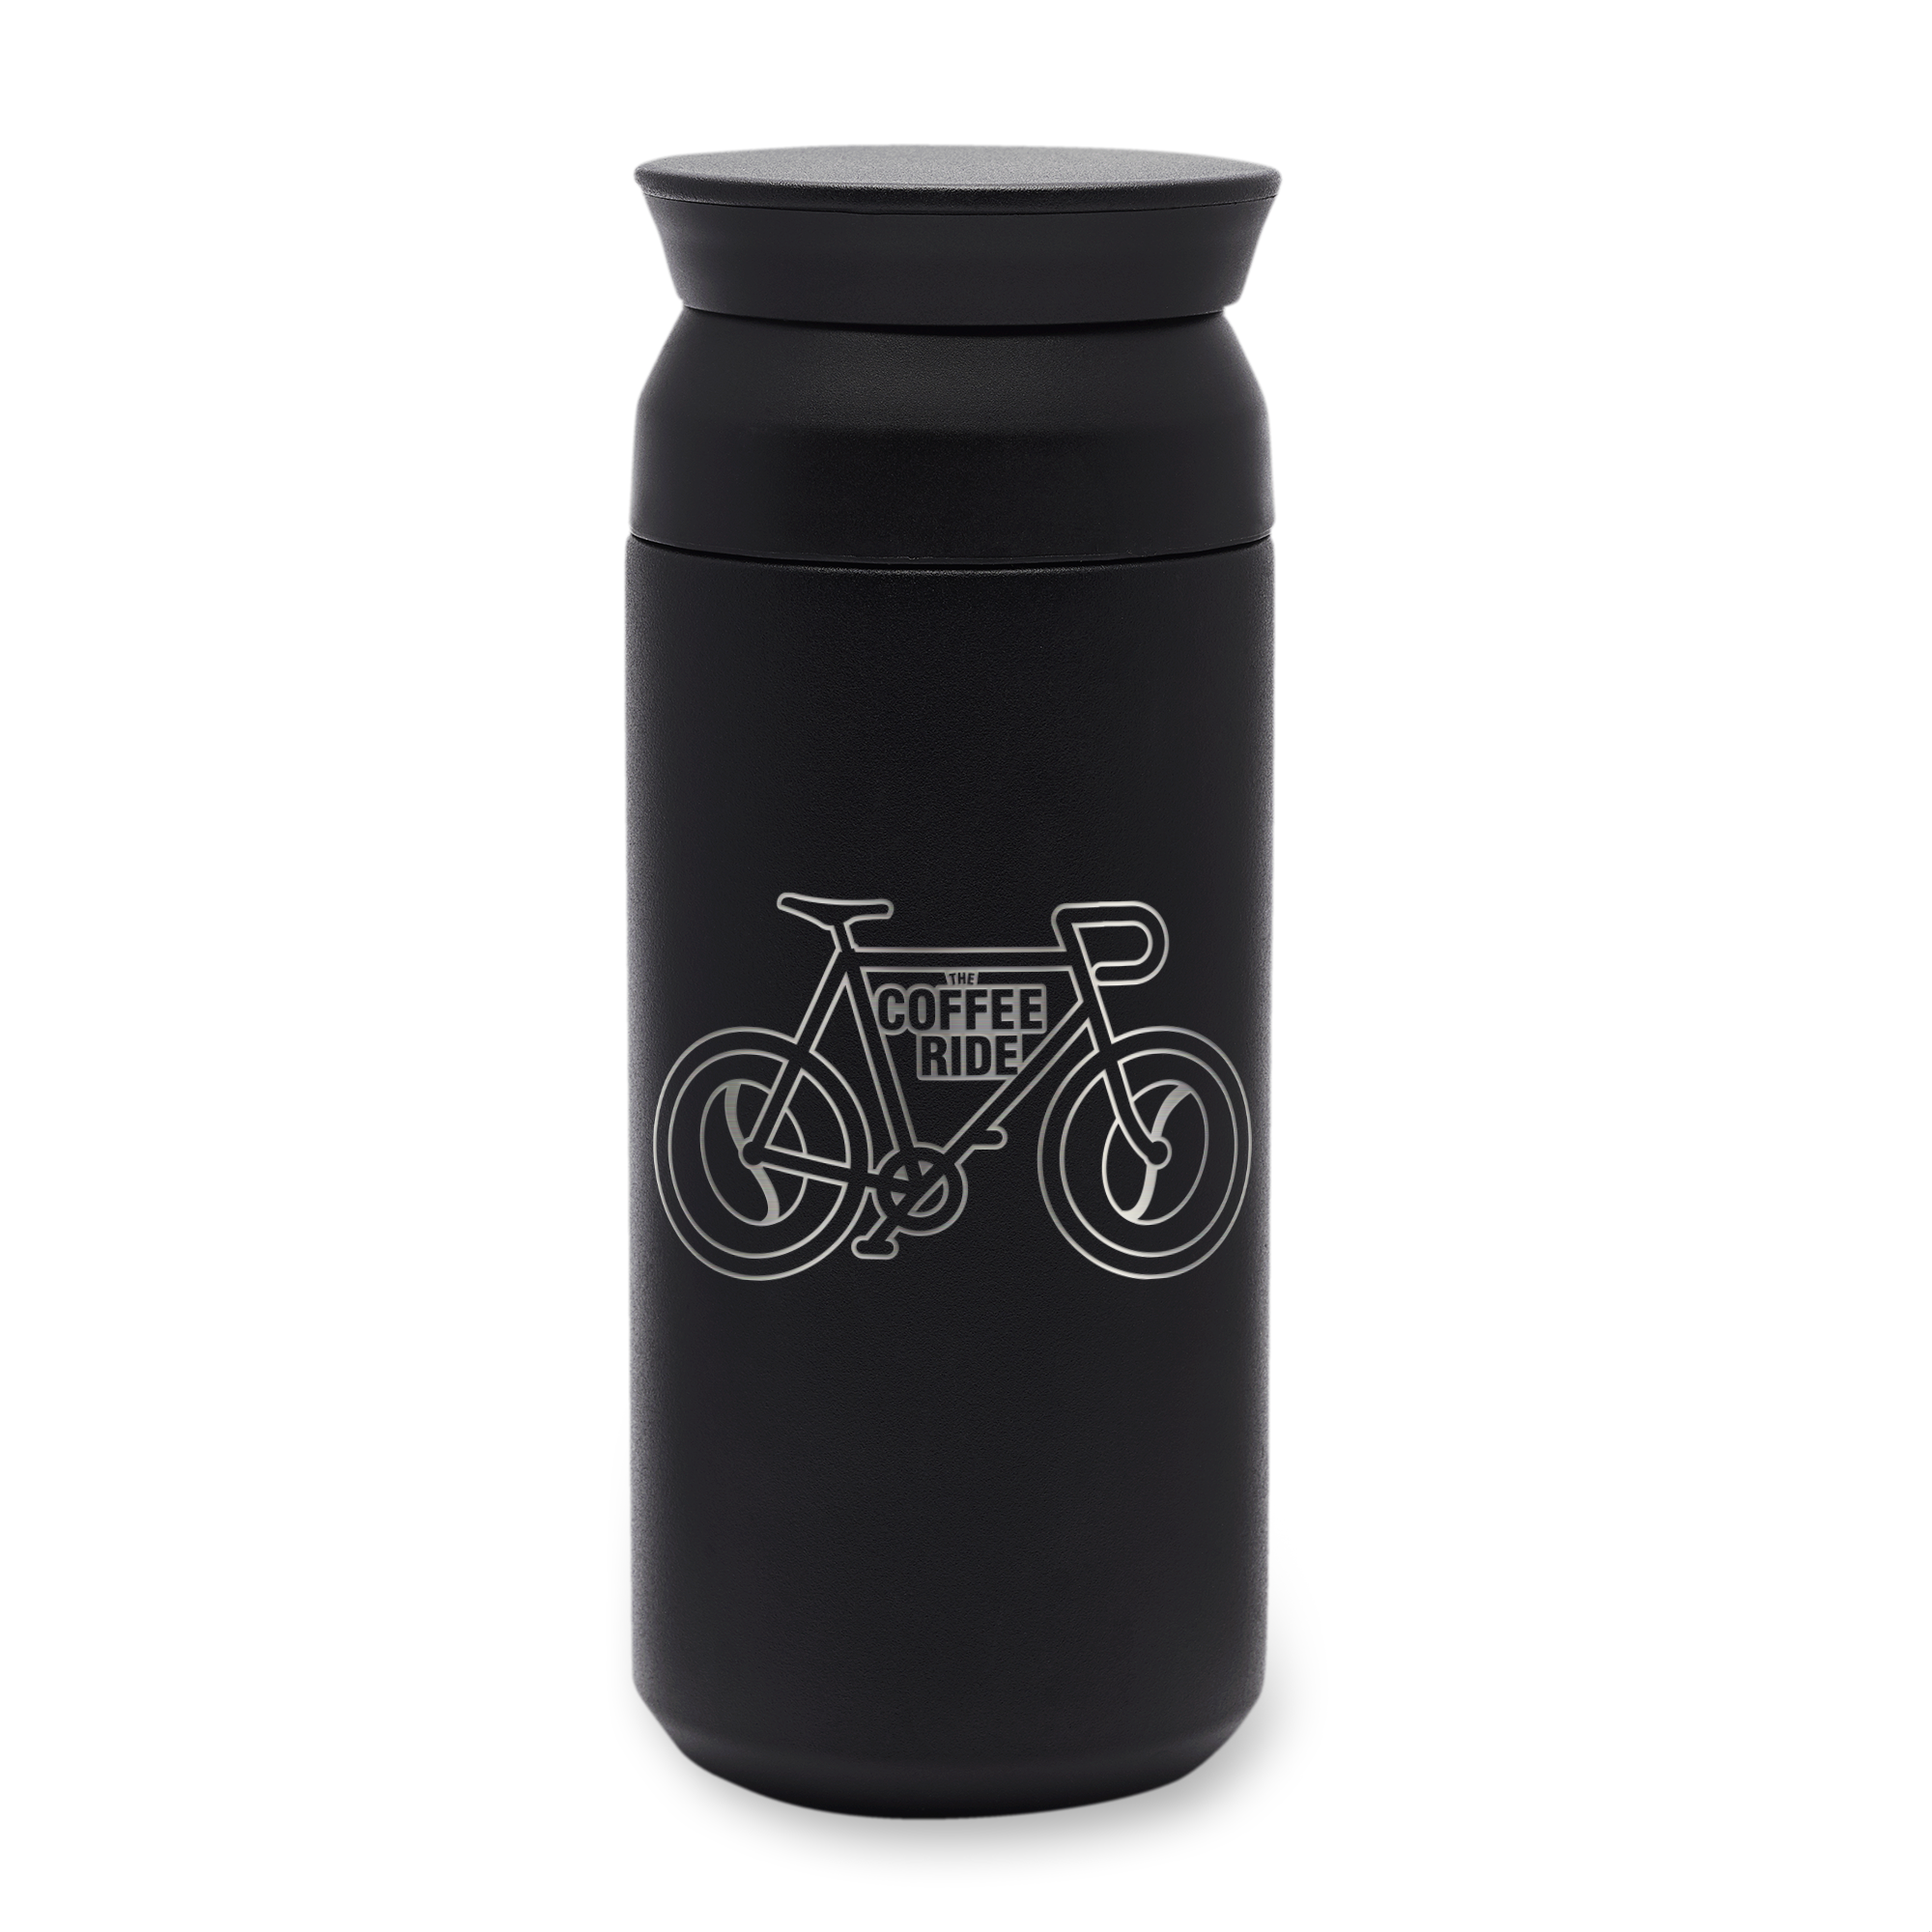 Albrecht / BICI CBB / Coffee Beer Bikes Vacuum Sealed Coffee / Tea Thermos  (fits Water bottle cages) - 12oz - Albrecht Cycle Shop